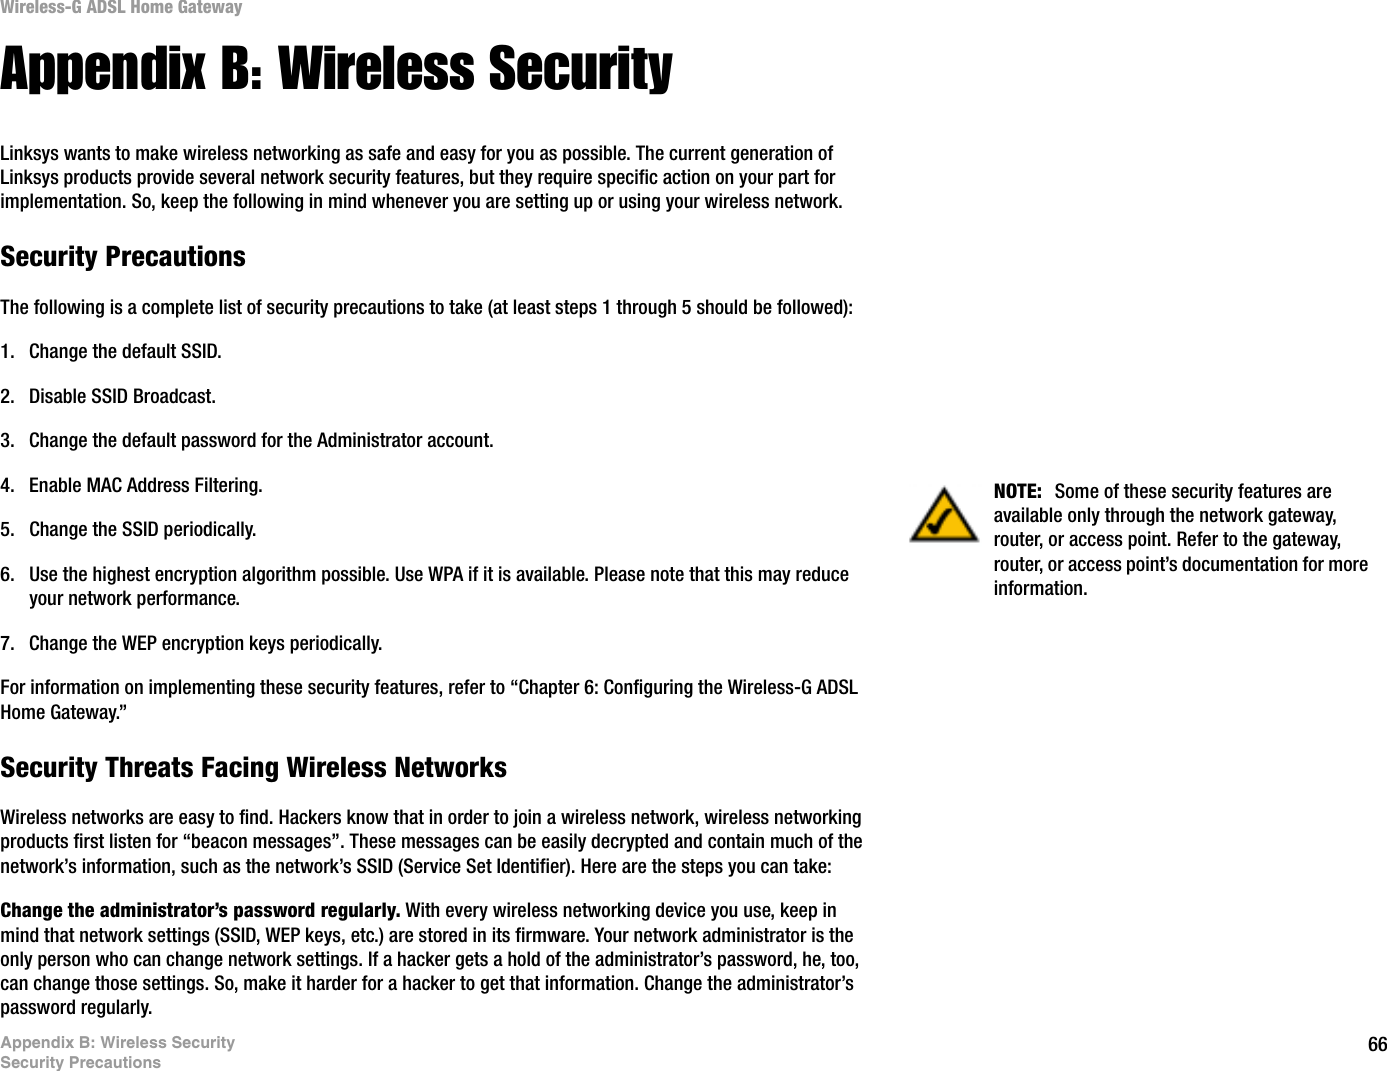 66Appendix B: Wireless SecuritySecurity PrecautionsWireless-G ADSL Home GatewayAppendix B: Wireless SecurityLinksys wants to make wireless networking as safe and easy for you as possible. The current generation of Linksys products provide several network security features, but they require specific action on your part for implementation. So, keep the following in mind whenever you are setting up or using your wireless network.Security PrecautionsThe following is a complete list of security precautions to take (at least steps 1 through 5 should be followed):1. Change the default SSID. 2. Disable SSID Broadcast. 3. Change the default password for the Administrator account. 4. Enable MAC Address Filtering. 5. Change the SSID periodically. 6. Use the highest encryption algorithm possible. Use WPA if it is available. Please note that this may reduce your network performance. 7. Change the WEP encryption keys periodically. For information on implementing these security features, refer to “Chapter 6: Configuring the Wireless-G ADSL Home Gateway.”Security Threats Facing Wireless Networks Wireless networks are easy to find. Hackers know that in order to join a wireless network, wireless networking products first listen for “beacon messages”. These messages can be easily decrypted and contain much of the network’s information, such as the network’s SSID (Service Set Identifier). Here are the steps you can take:Change the administrator’s password regularly. With every wireless networking device you use, keep in mind that network settings (SSID, WEP keys, etc.) are stored in its firmware. Your network administrator is the only person who can change network settings. If a hacker gets a hold of the administrator’s password, he, too, can change those settings. So, make it harder for a hacker to get that information. Change the administrator’s password regularly.NOTE:  Some of these security features are available only through the network gateway, router, or access point. Refer to the gateway, router, or access point’s documentation for more information.